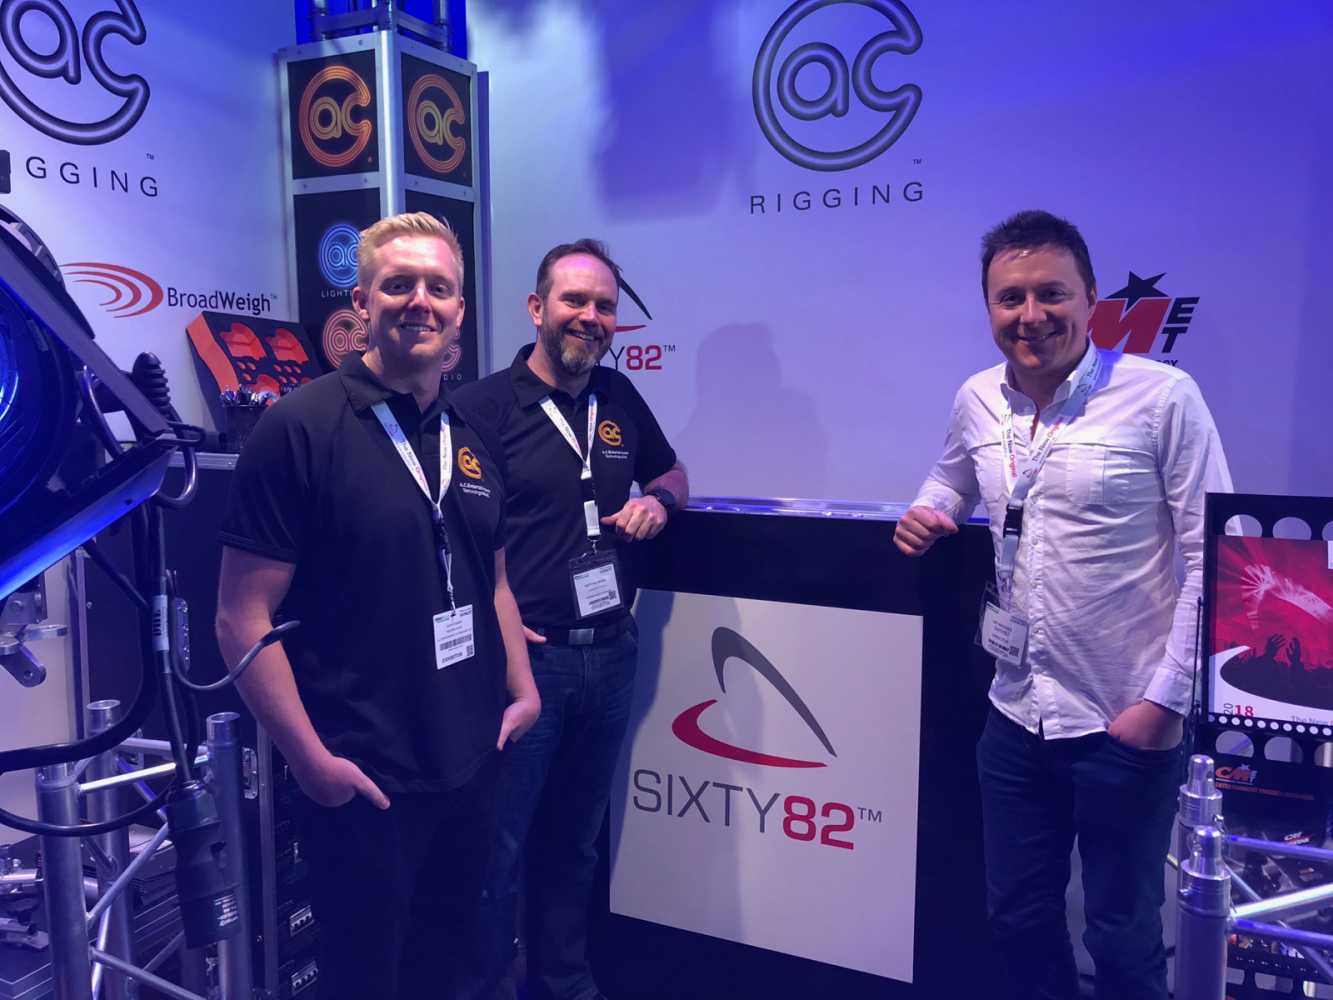 AC-ET's Oliver Sharpe and Matthew Millward with Sixty82's co-founder, Lee Brooks